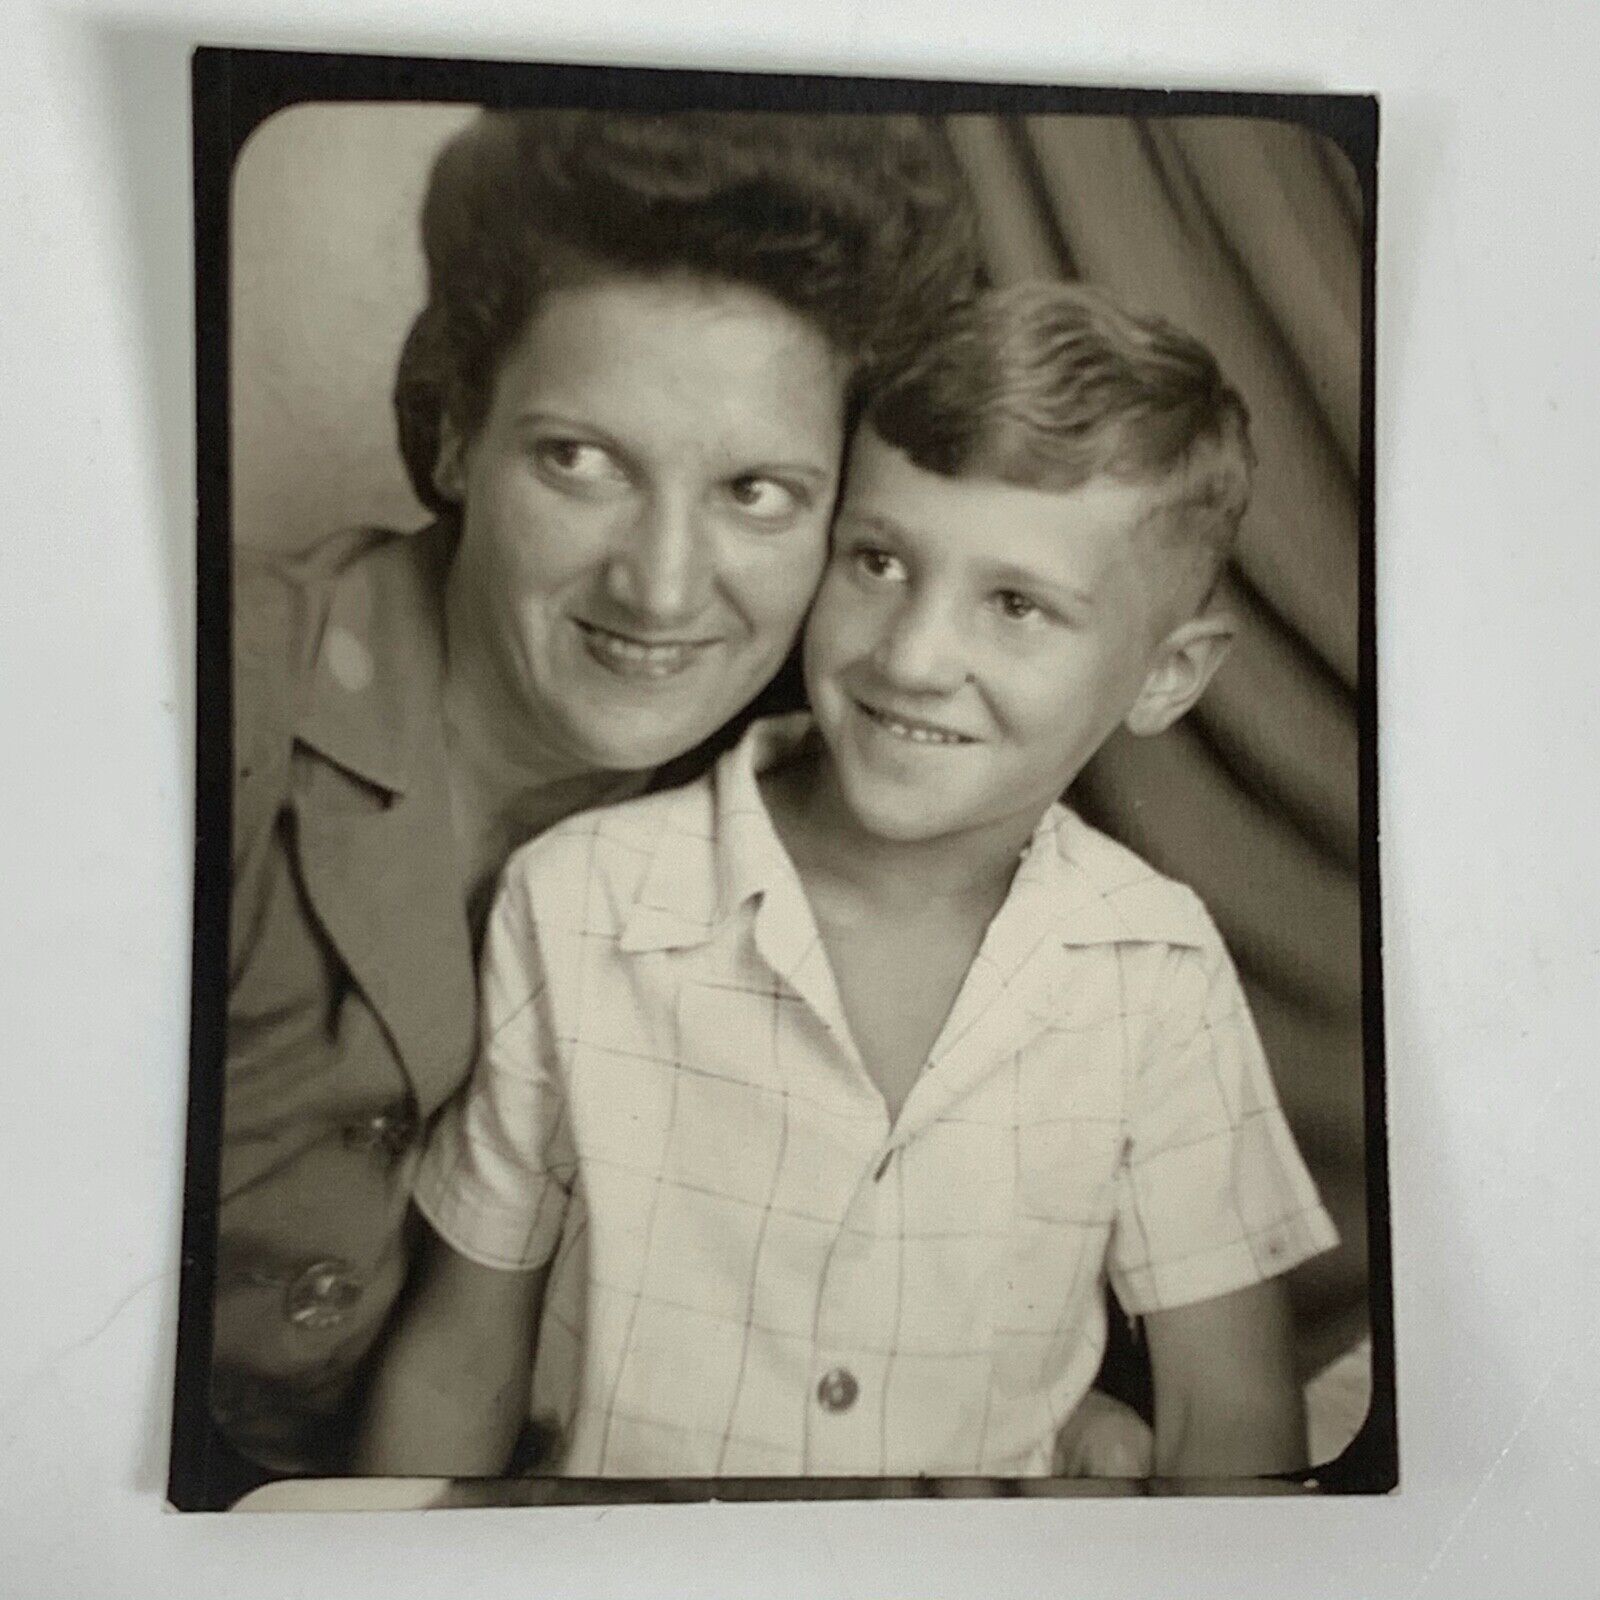 (AdB) FOUND PHOTO Photograph Snapshot Vintage Happy Mother Son Photo Booth